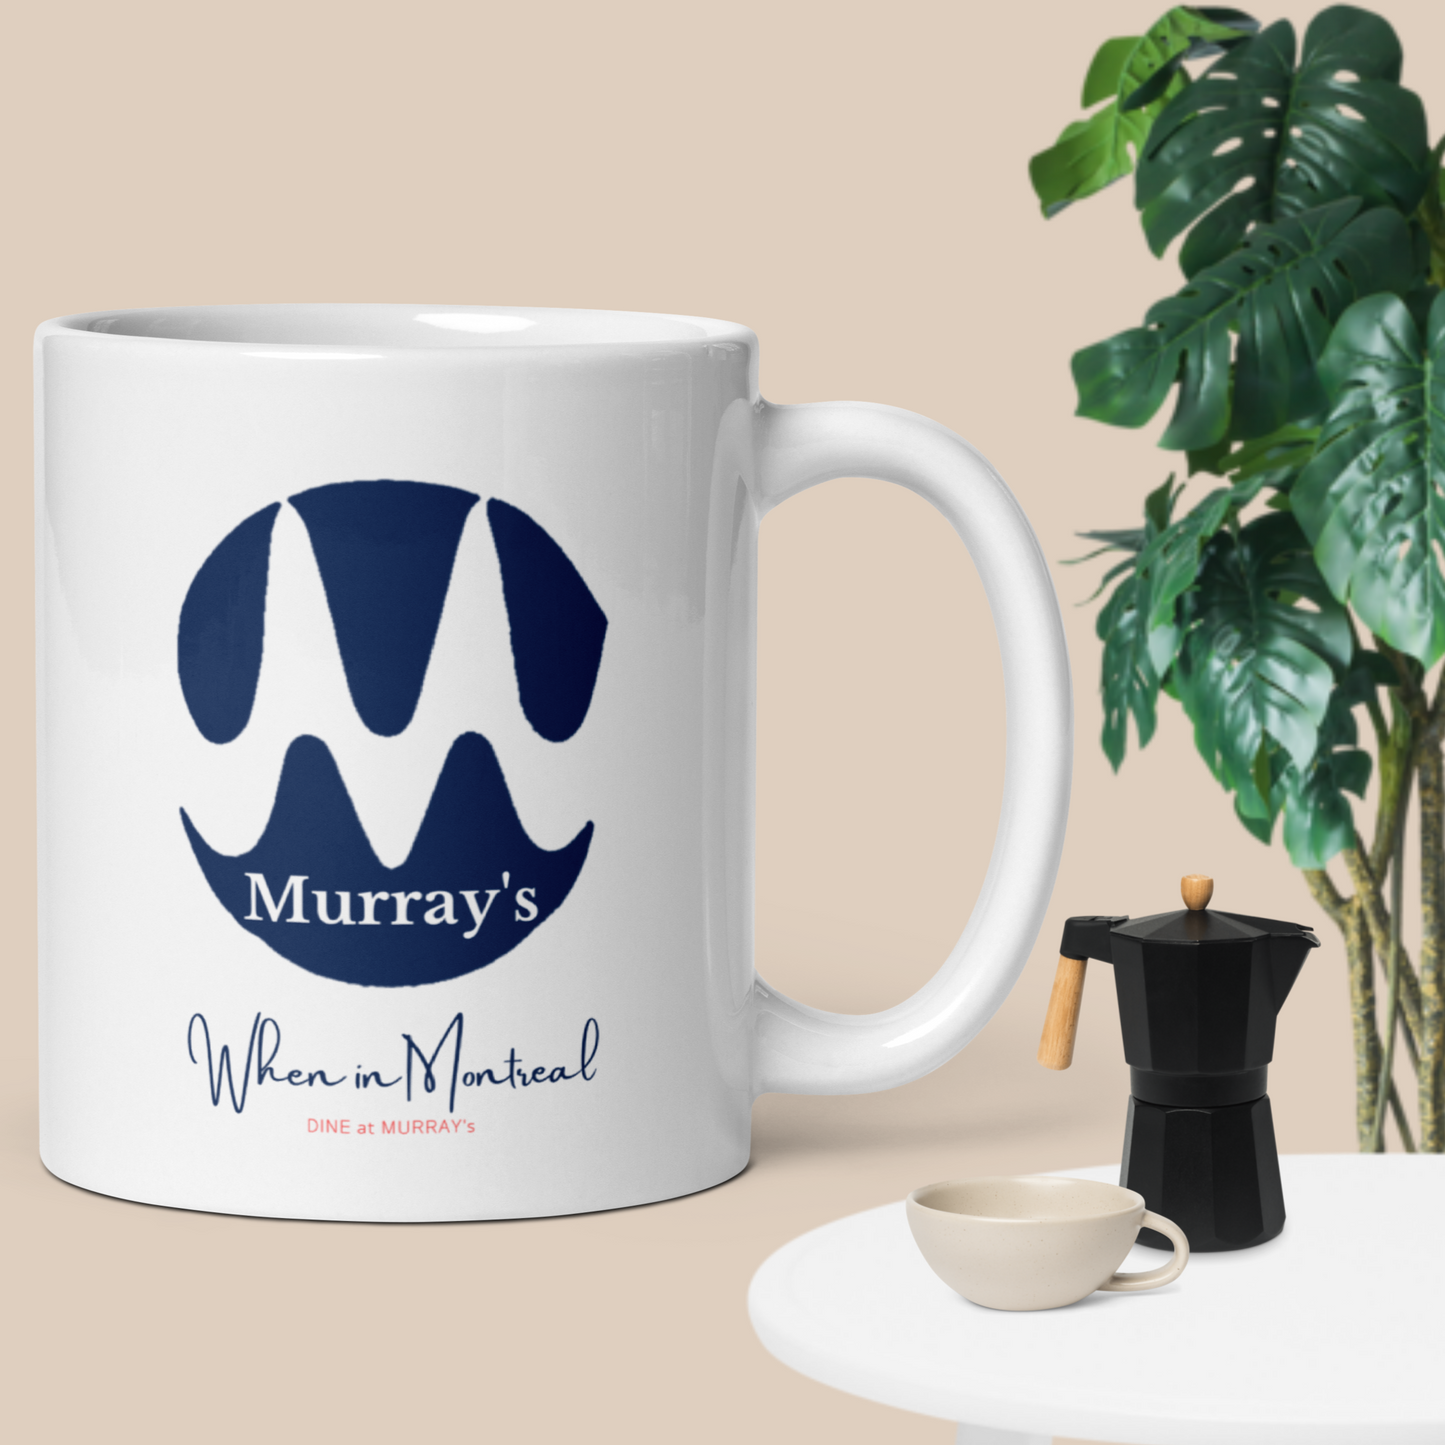 This 11 ounce white mug has the Murray's Restaurant logo printed on it.